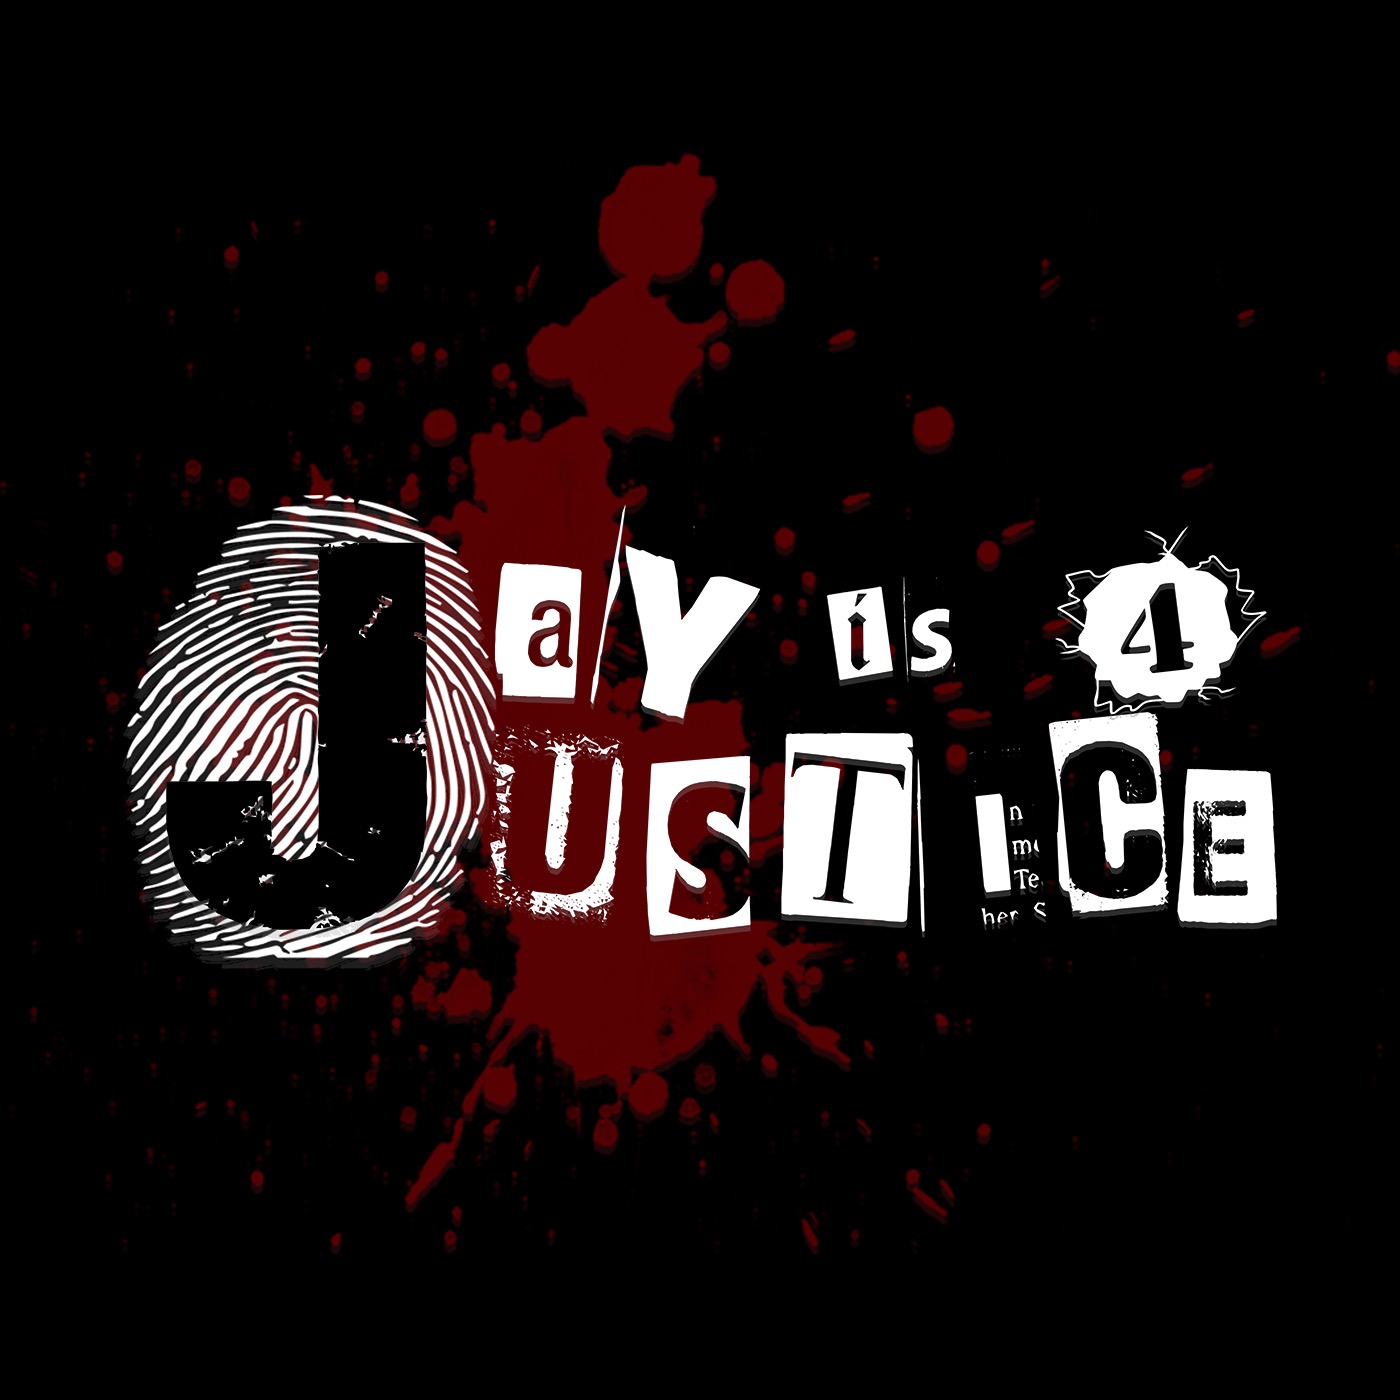 Court TV Mention: Jay is 4 Justice Podcast! What!? Summer Wells Case Epi 22 Pt 6